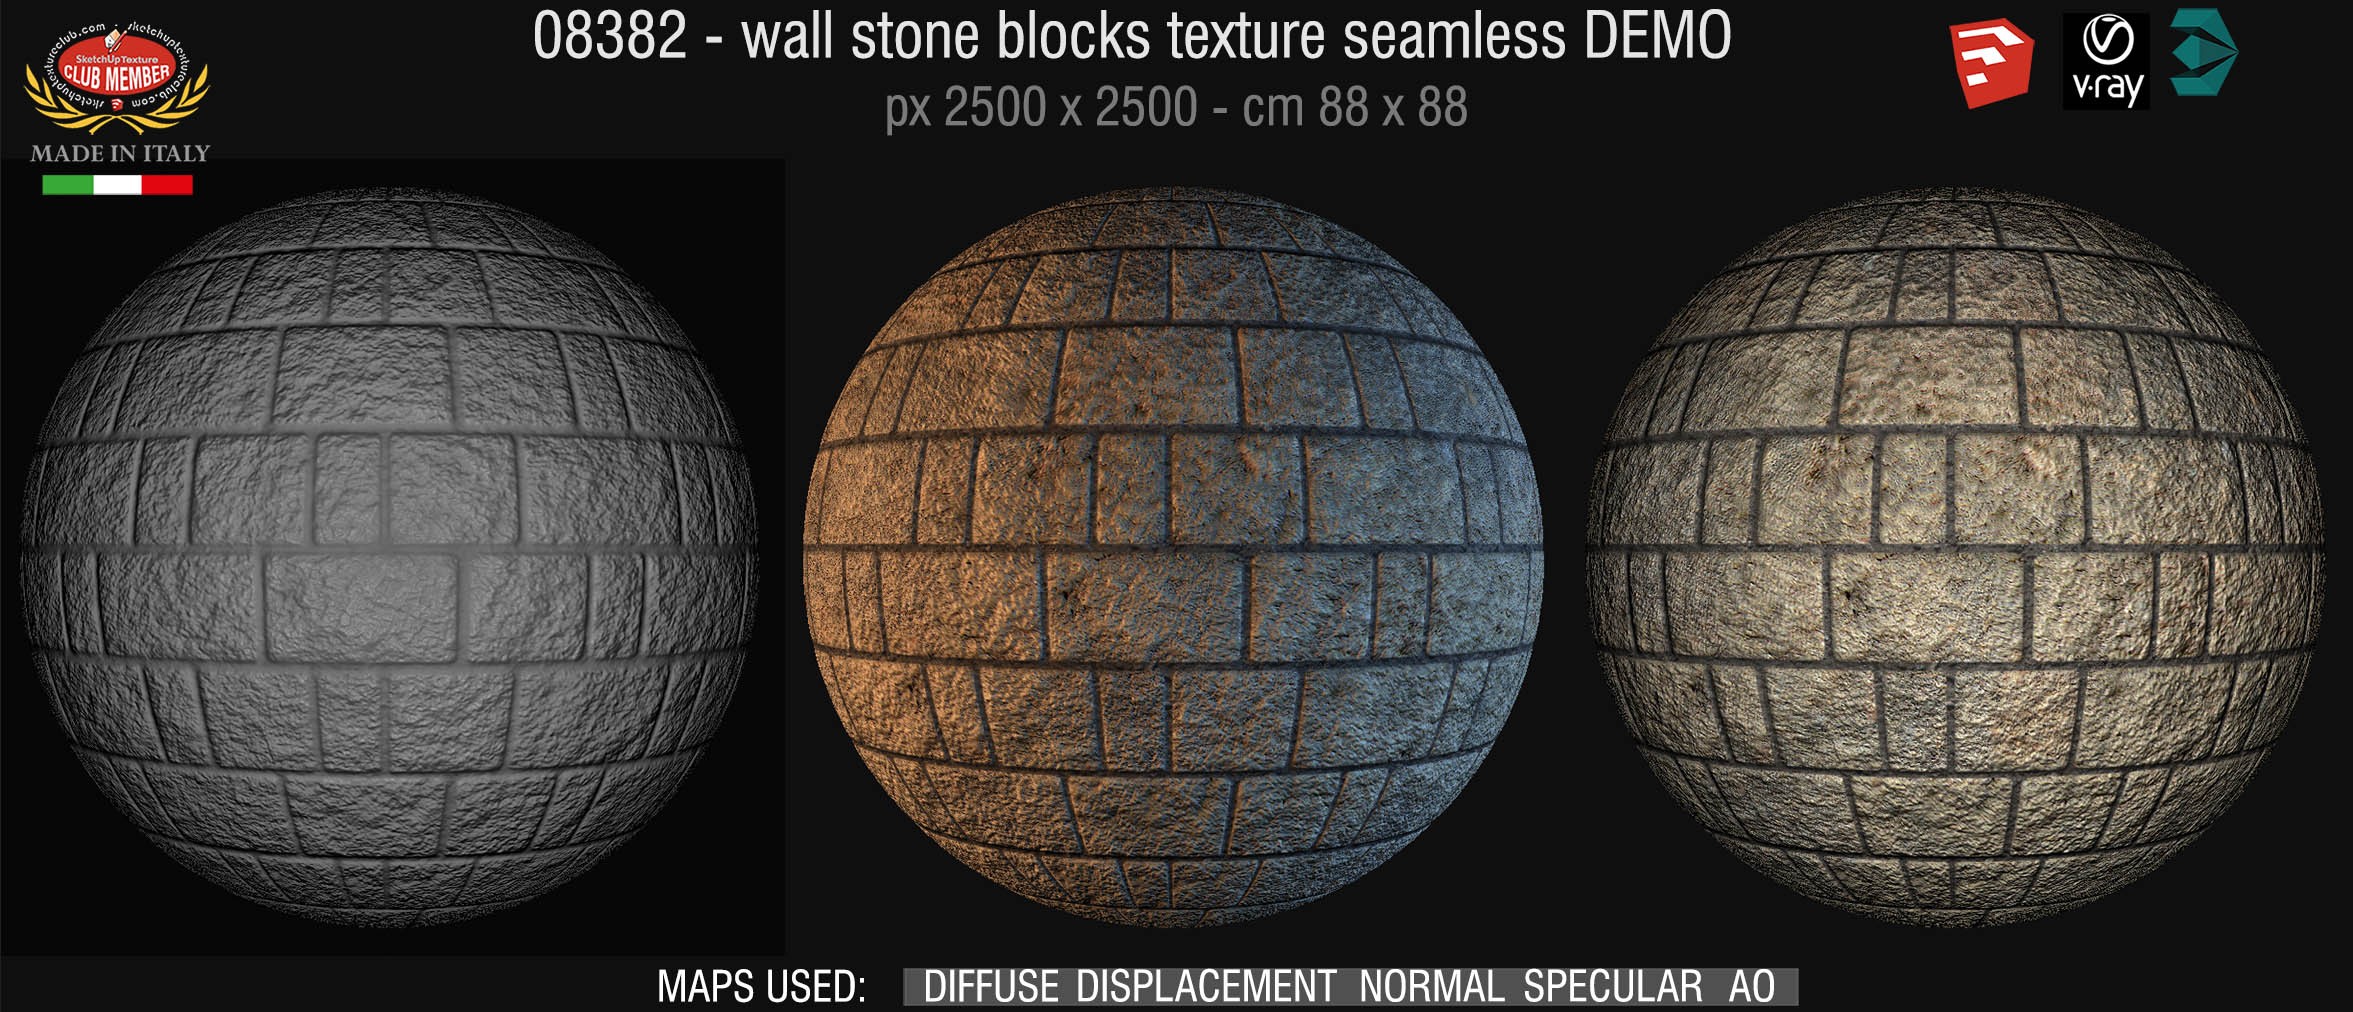 08382 HR Wall stone with regular blocks texture + maps DEMO